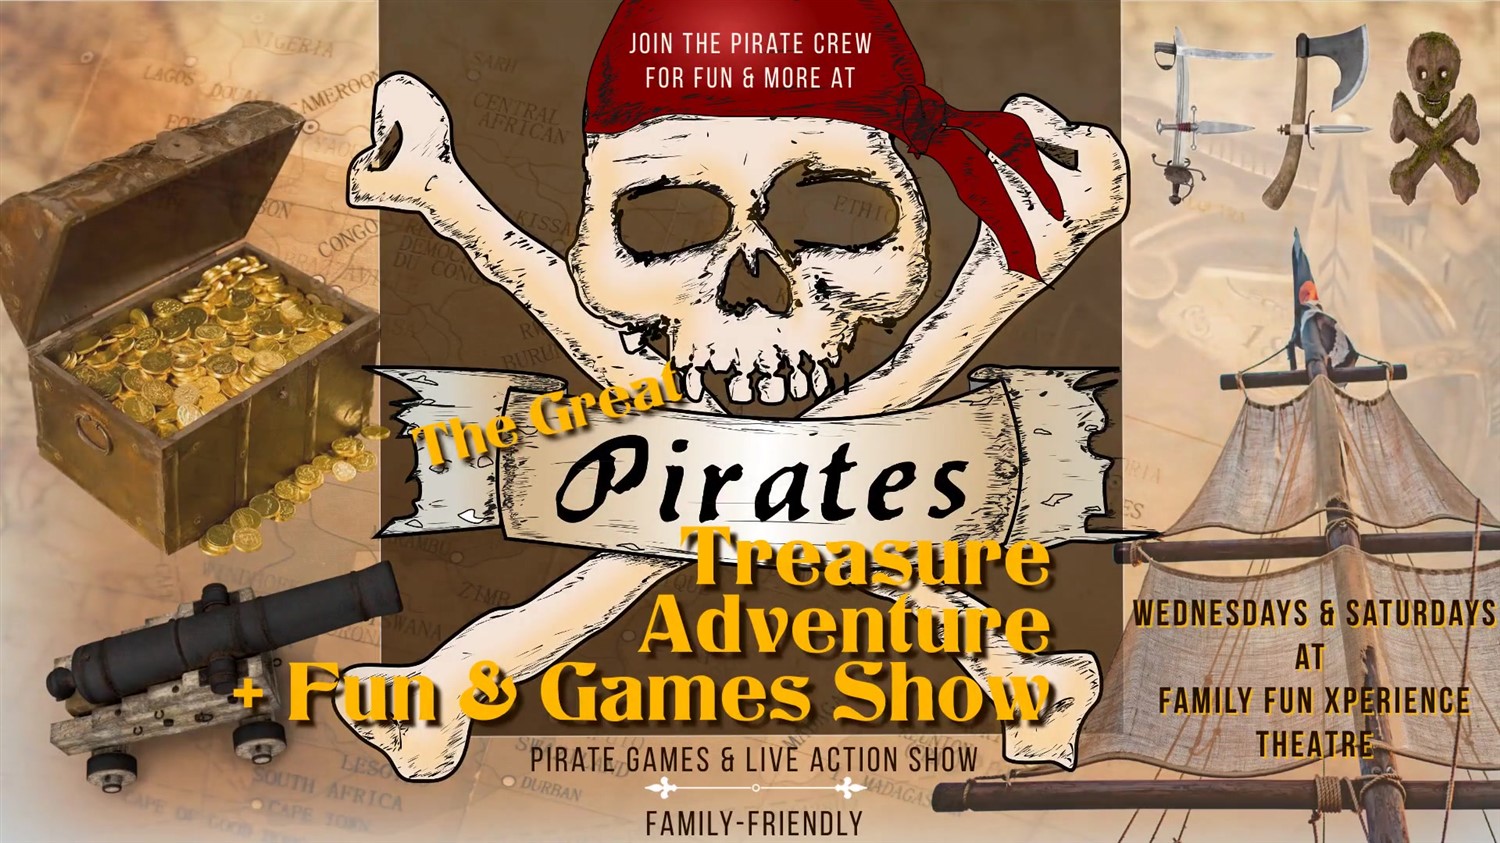 PIRATE ADVENTURE FUN & GAMES SHOW 5-Star Xperience with the Foggy FoX Pirates! on sep. 24, 19:00@FFX Theatre - Pick a seat, Buy tickets and Get information on Family Fun Xperience tickets.ffxshow.org